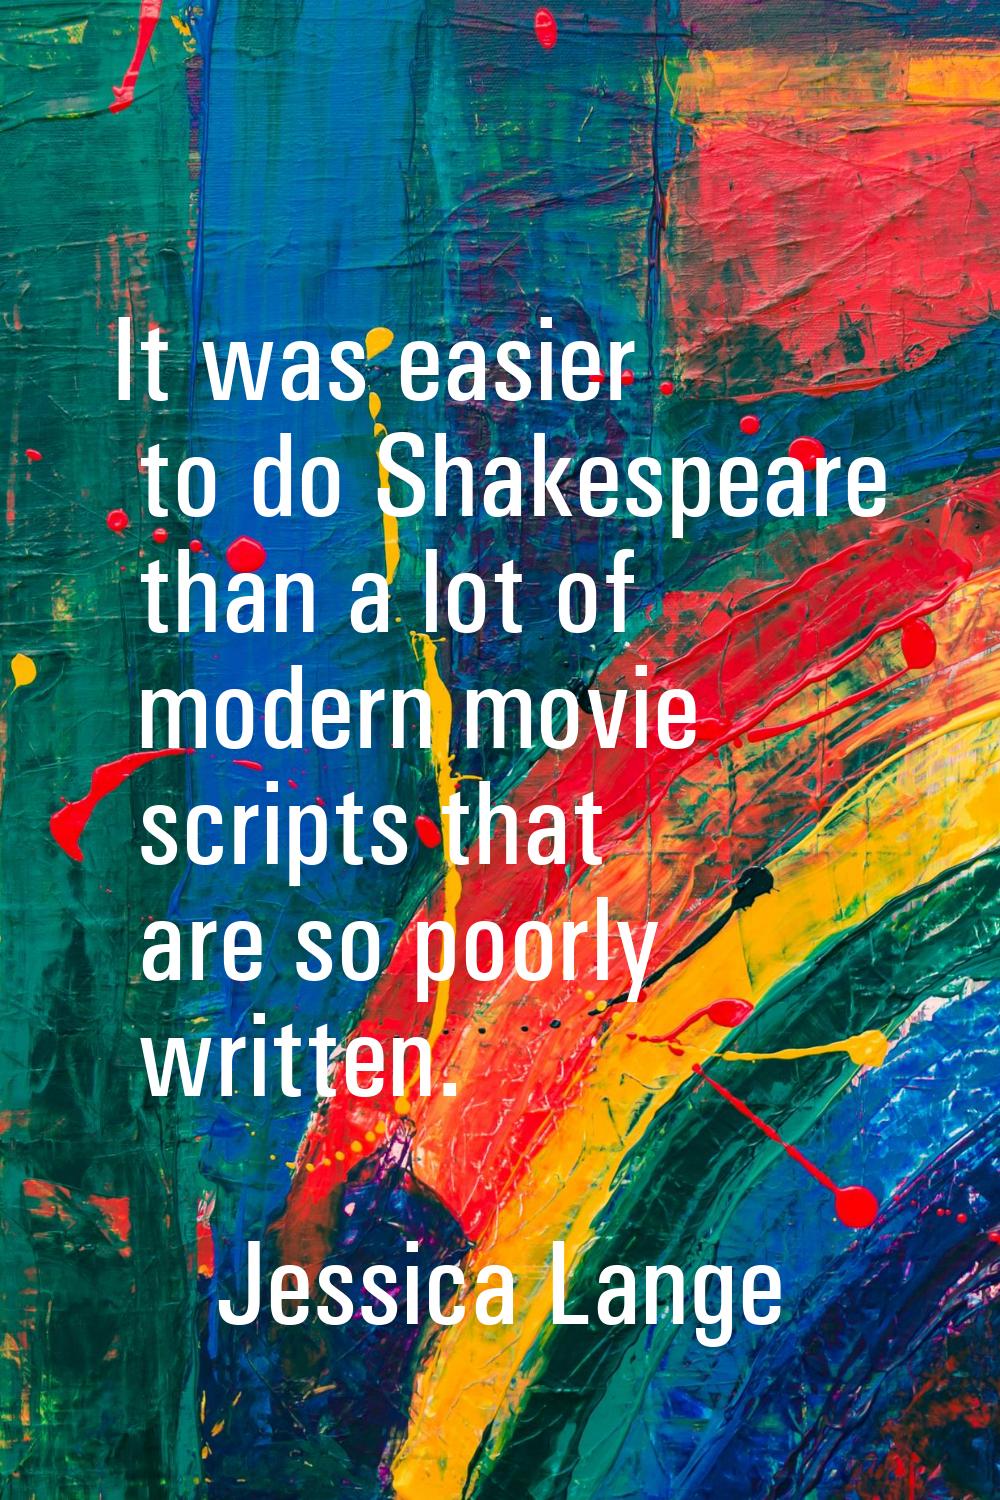 It was easier to do Shakespeare than a lot of modern movie scripts that are so poorly written.